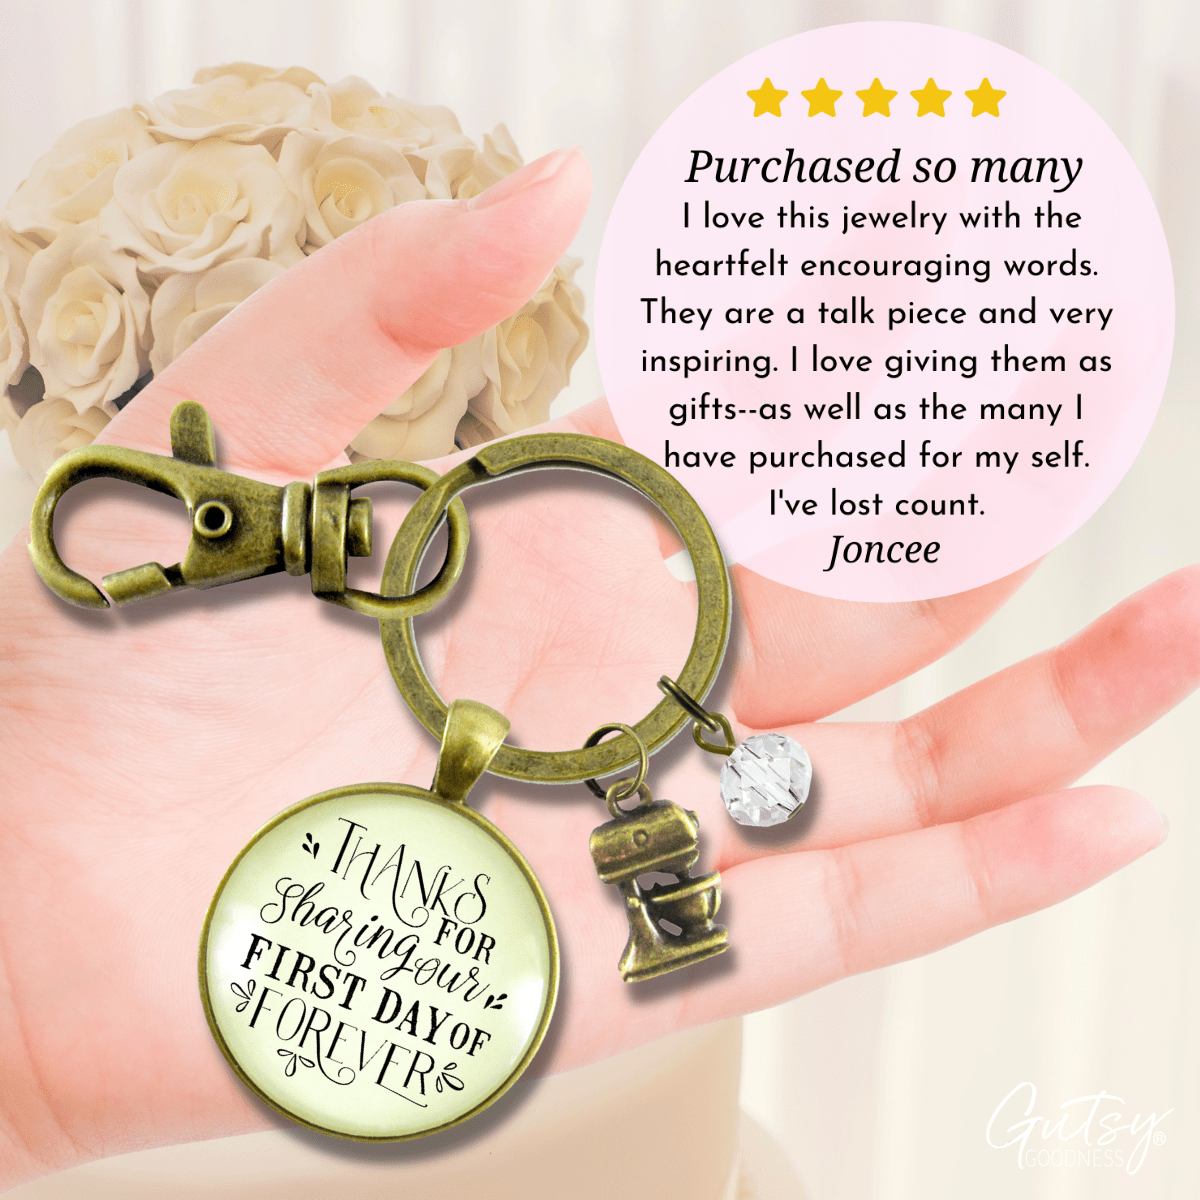 Wedding Cake Baker Gift Keychain Thanks for Sharing Our Day Charm - Gutsy Goodness